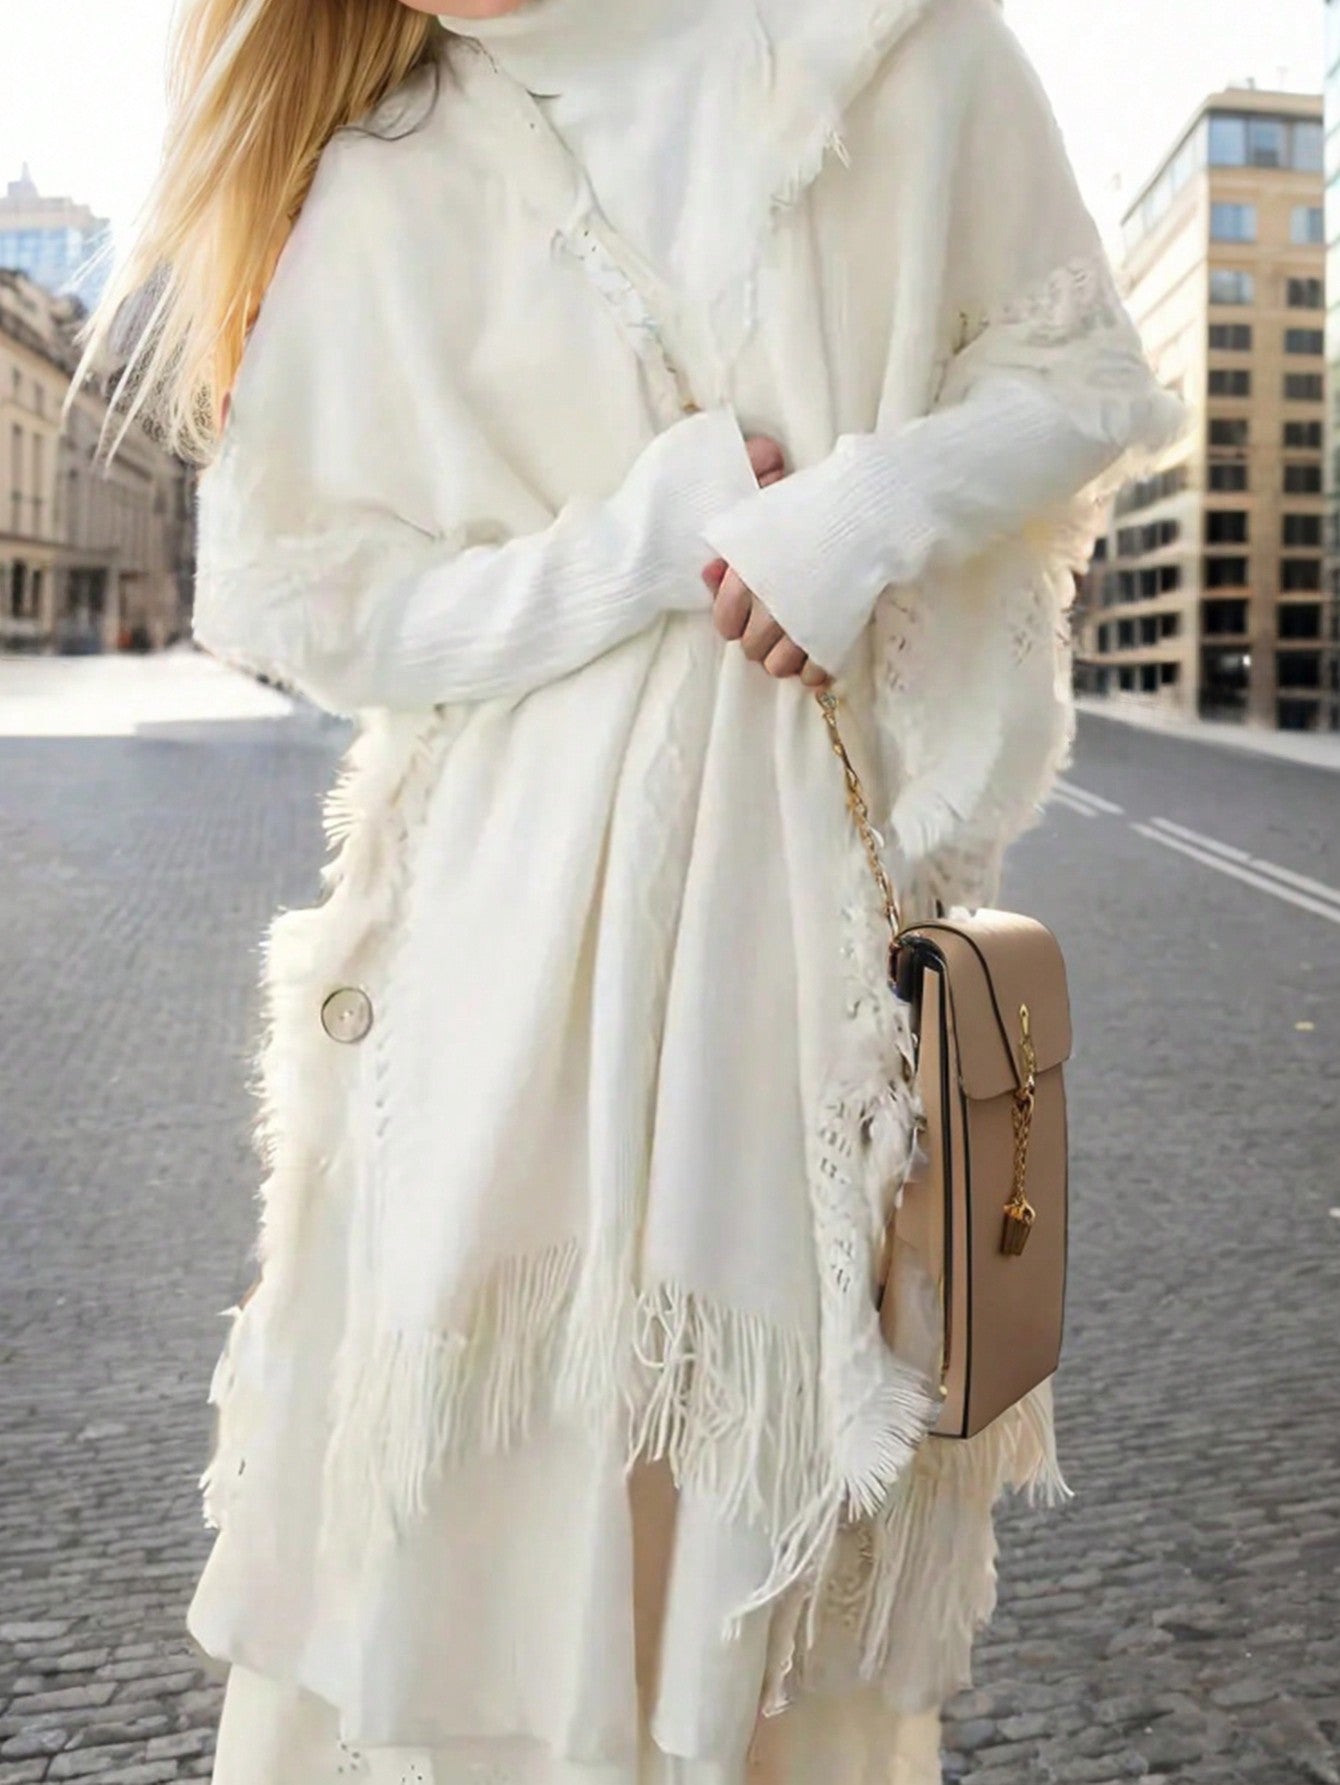 Essnce 1pc Hooded Sweater With Fringe Detail Decorative Button Cape